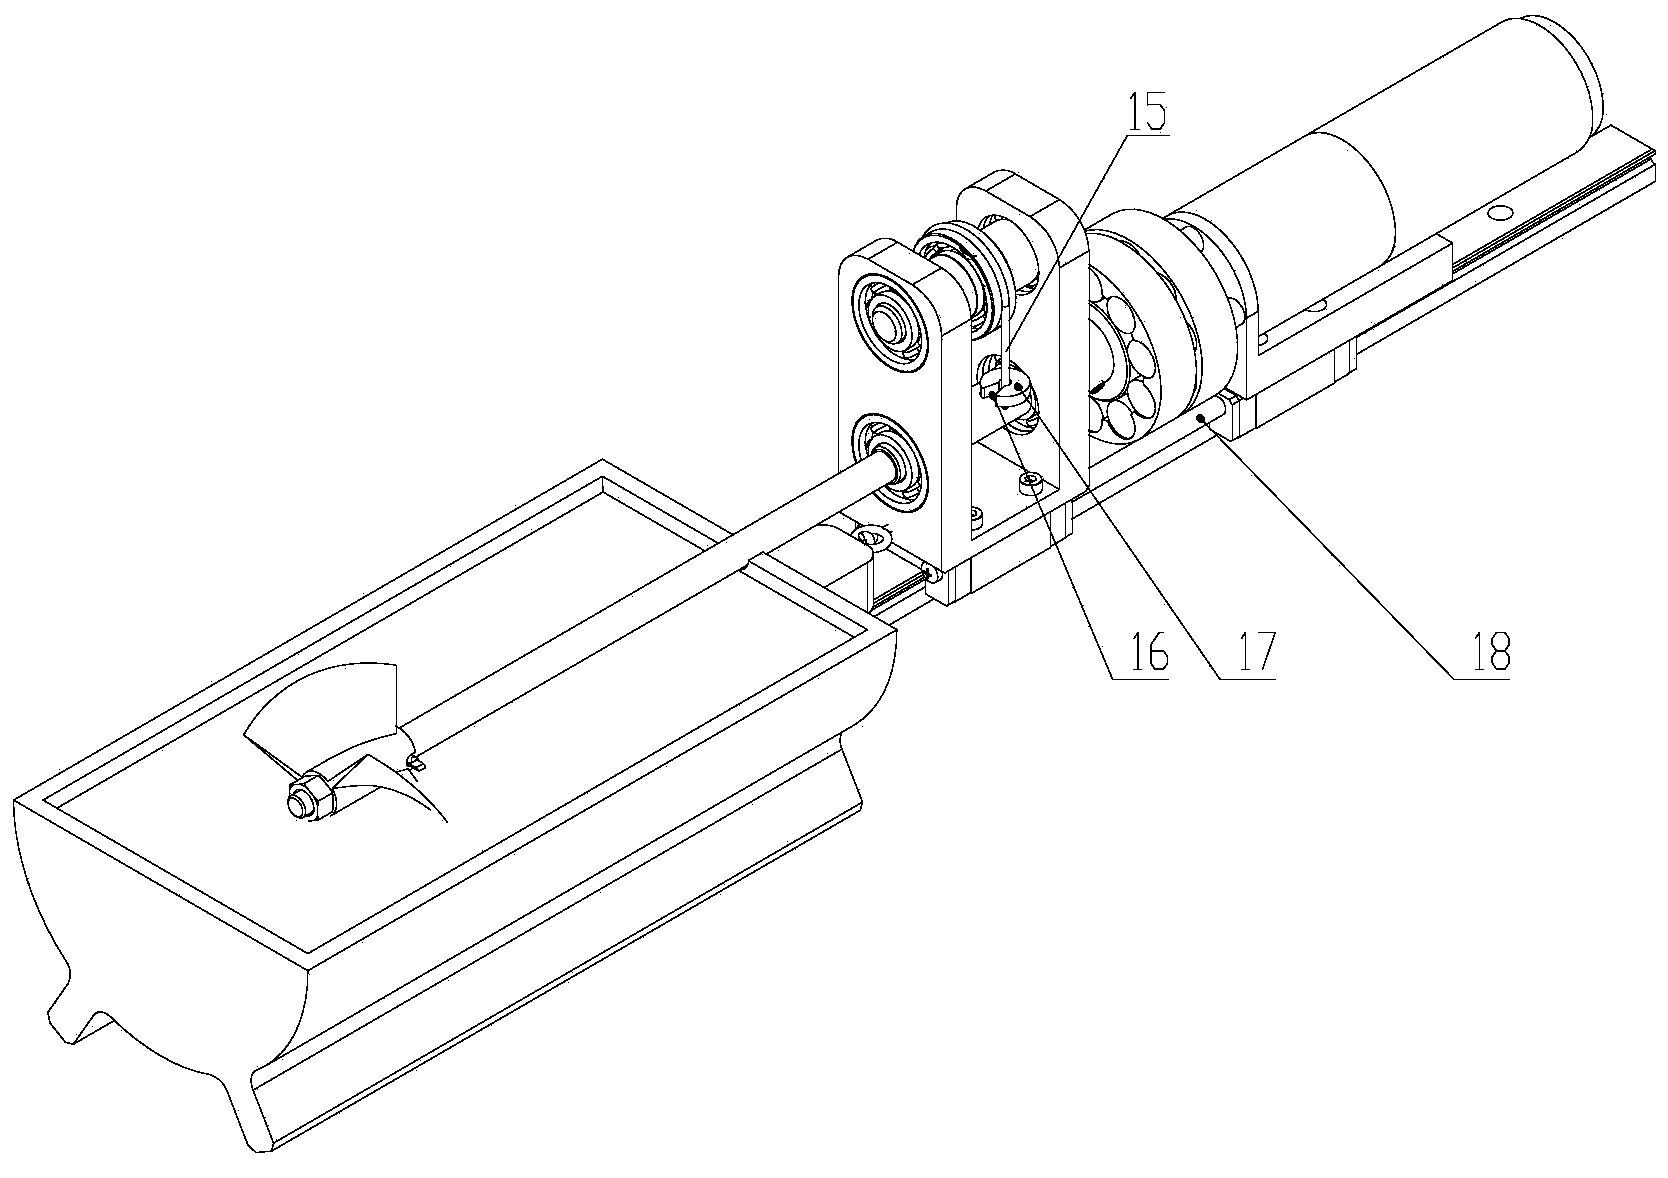 Device for measuring thrust force of propeller and magnetic transmission torque